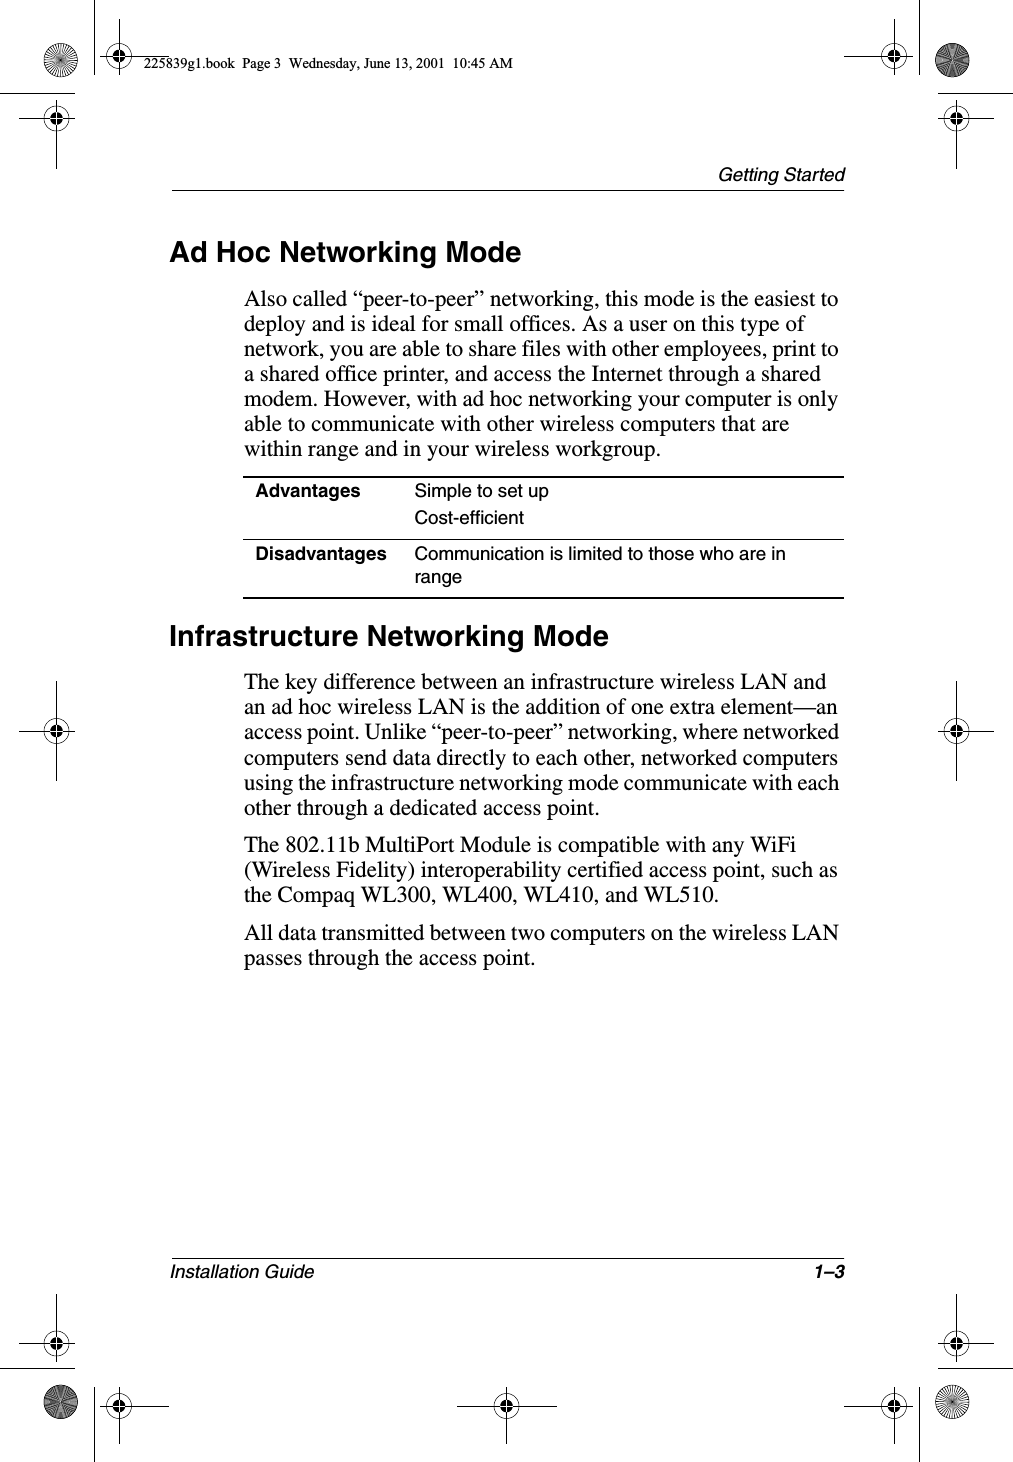 Getting StartedInstallation Guide 1–3Ad Hoc Networking ModeAlso called “peer-to-peer” networking, this mode is the easiest to deploy and is ideal for small offices. As a user on this type of network, you are able to share files with other employees, print to a shared office printer, and access the Internet through a shared modem. However, with ad hoc networking your computer is only able to communicate with other wireless computers that are within range and in your wireless workgroup.Infrastructure Networking ModeThe key difference between an infrastructure wireless LAN and an ad hoc wireless LAN is the addition of one extra element—an access point. Unlike “peer-to-peer” networking, where networked computers send data directly to each other, networked computers using the infrastructure networking mode communicate with each other through a dedicated access point.The 802.11b MultiPort Module is compatible with any WiFi (Wireless Fidelity) interoperability certified access point, such as the Compaq WL300, WL400, WL410, and WL510.All data transmitted between two computers on the wireless LAN passes through the access point.Advantages Simple to set upCost-efficientDisadvantages Communication is limited to those who are in range225839g1.book  Page 3  Wednesday, June 13, 2001  10:45 AM